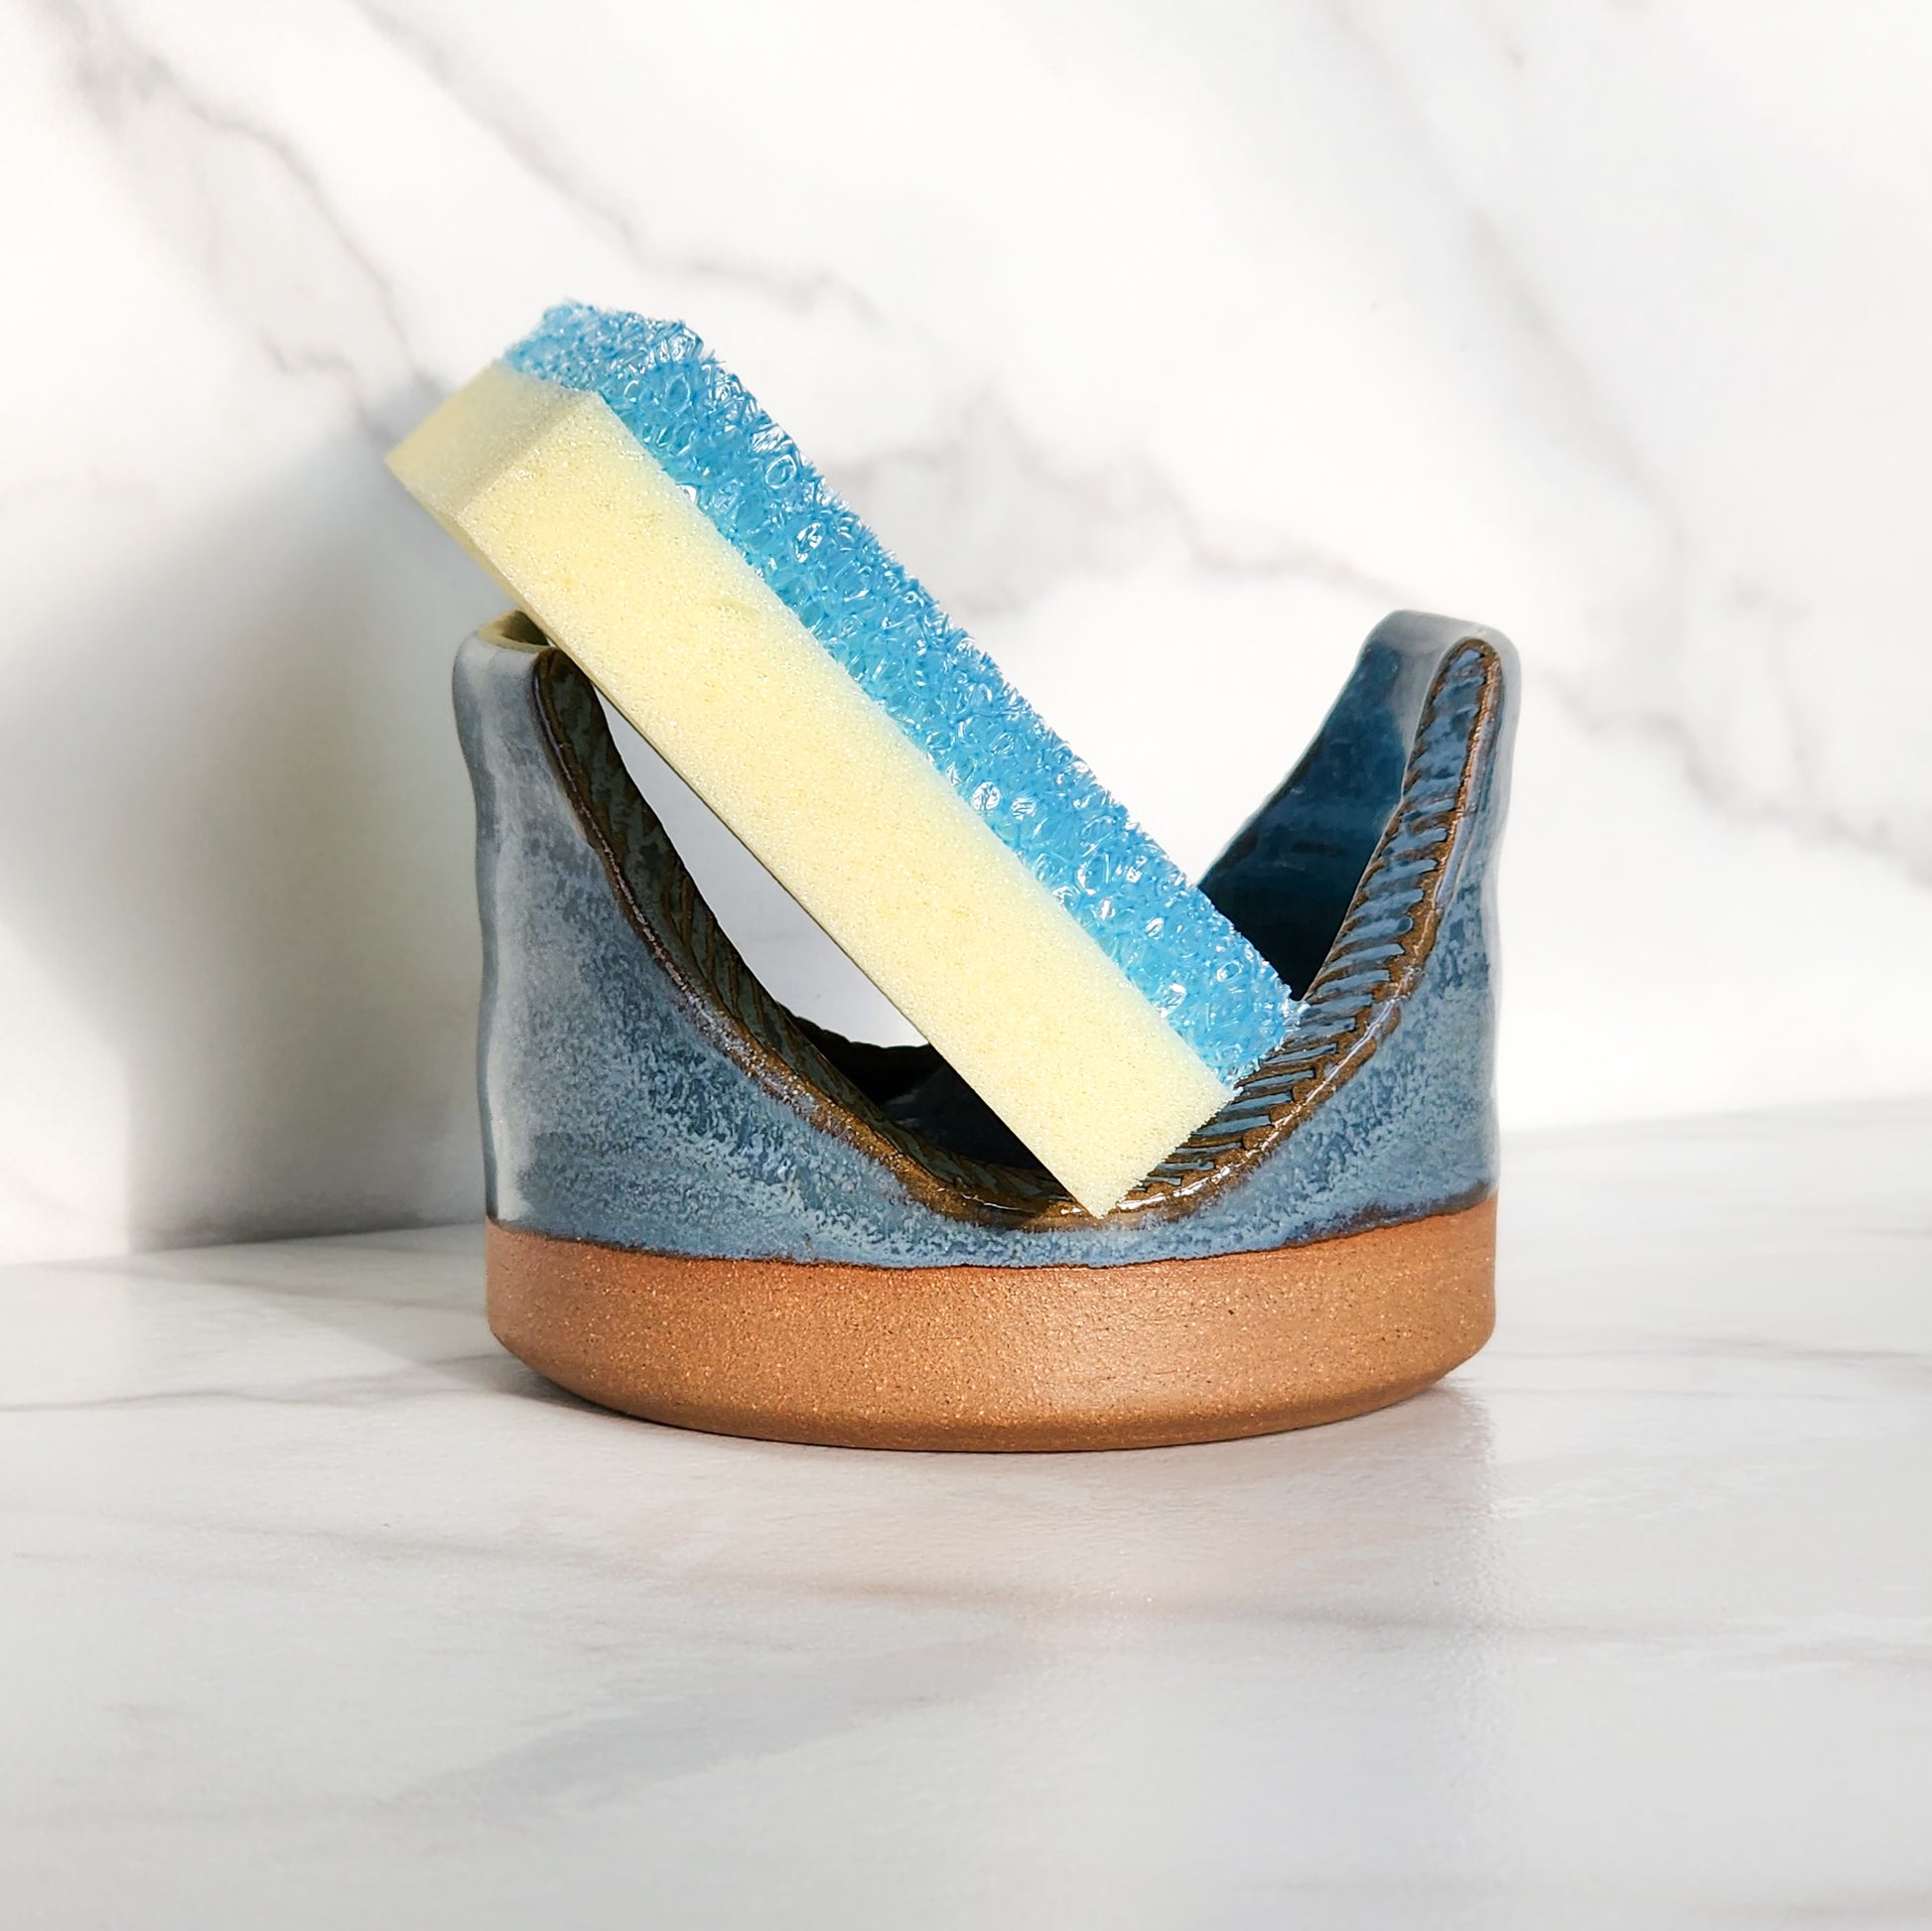  Image: Clinton Pottery's Handmade Sponge Holder in Light Blue – A refreshing and practical kitchen accessory, thoughtfully crafted by artisans. This durable stoneware holder, in serene Light Blue, adds a touch of tranquility to your kitchen, reminiscent of clear skies and calm waters. Designed to securely hold your sponge and prevent water spread, it keeps your counters and sink area tidy.